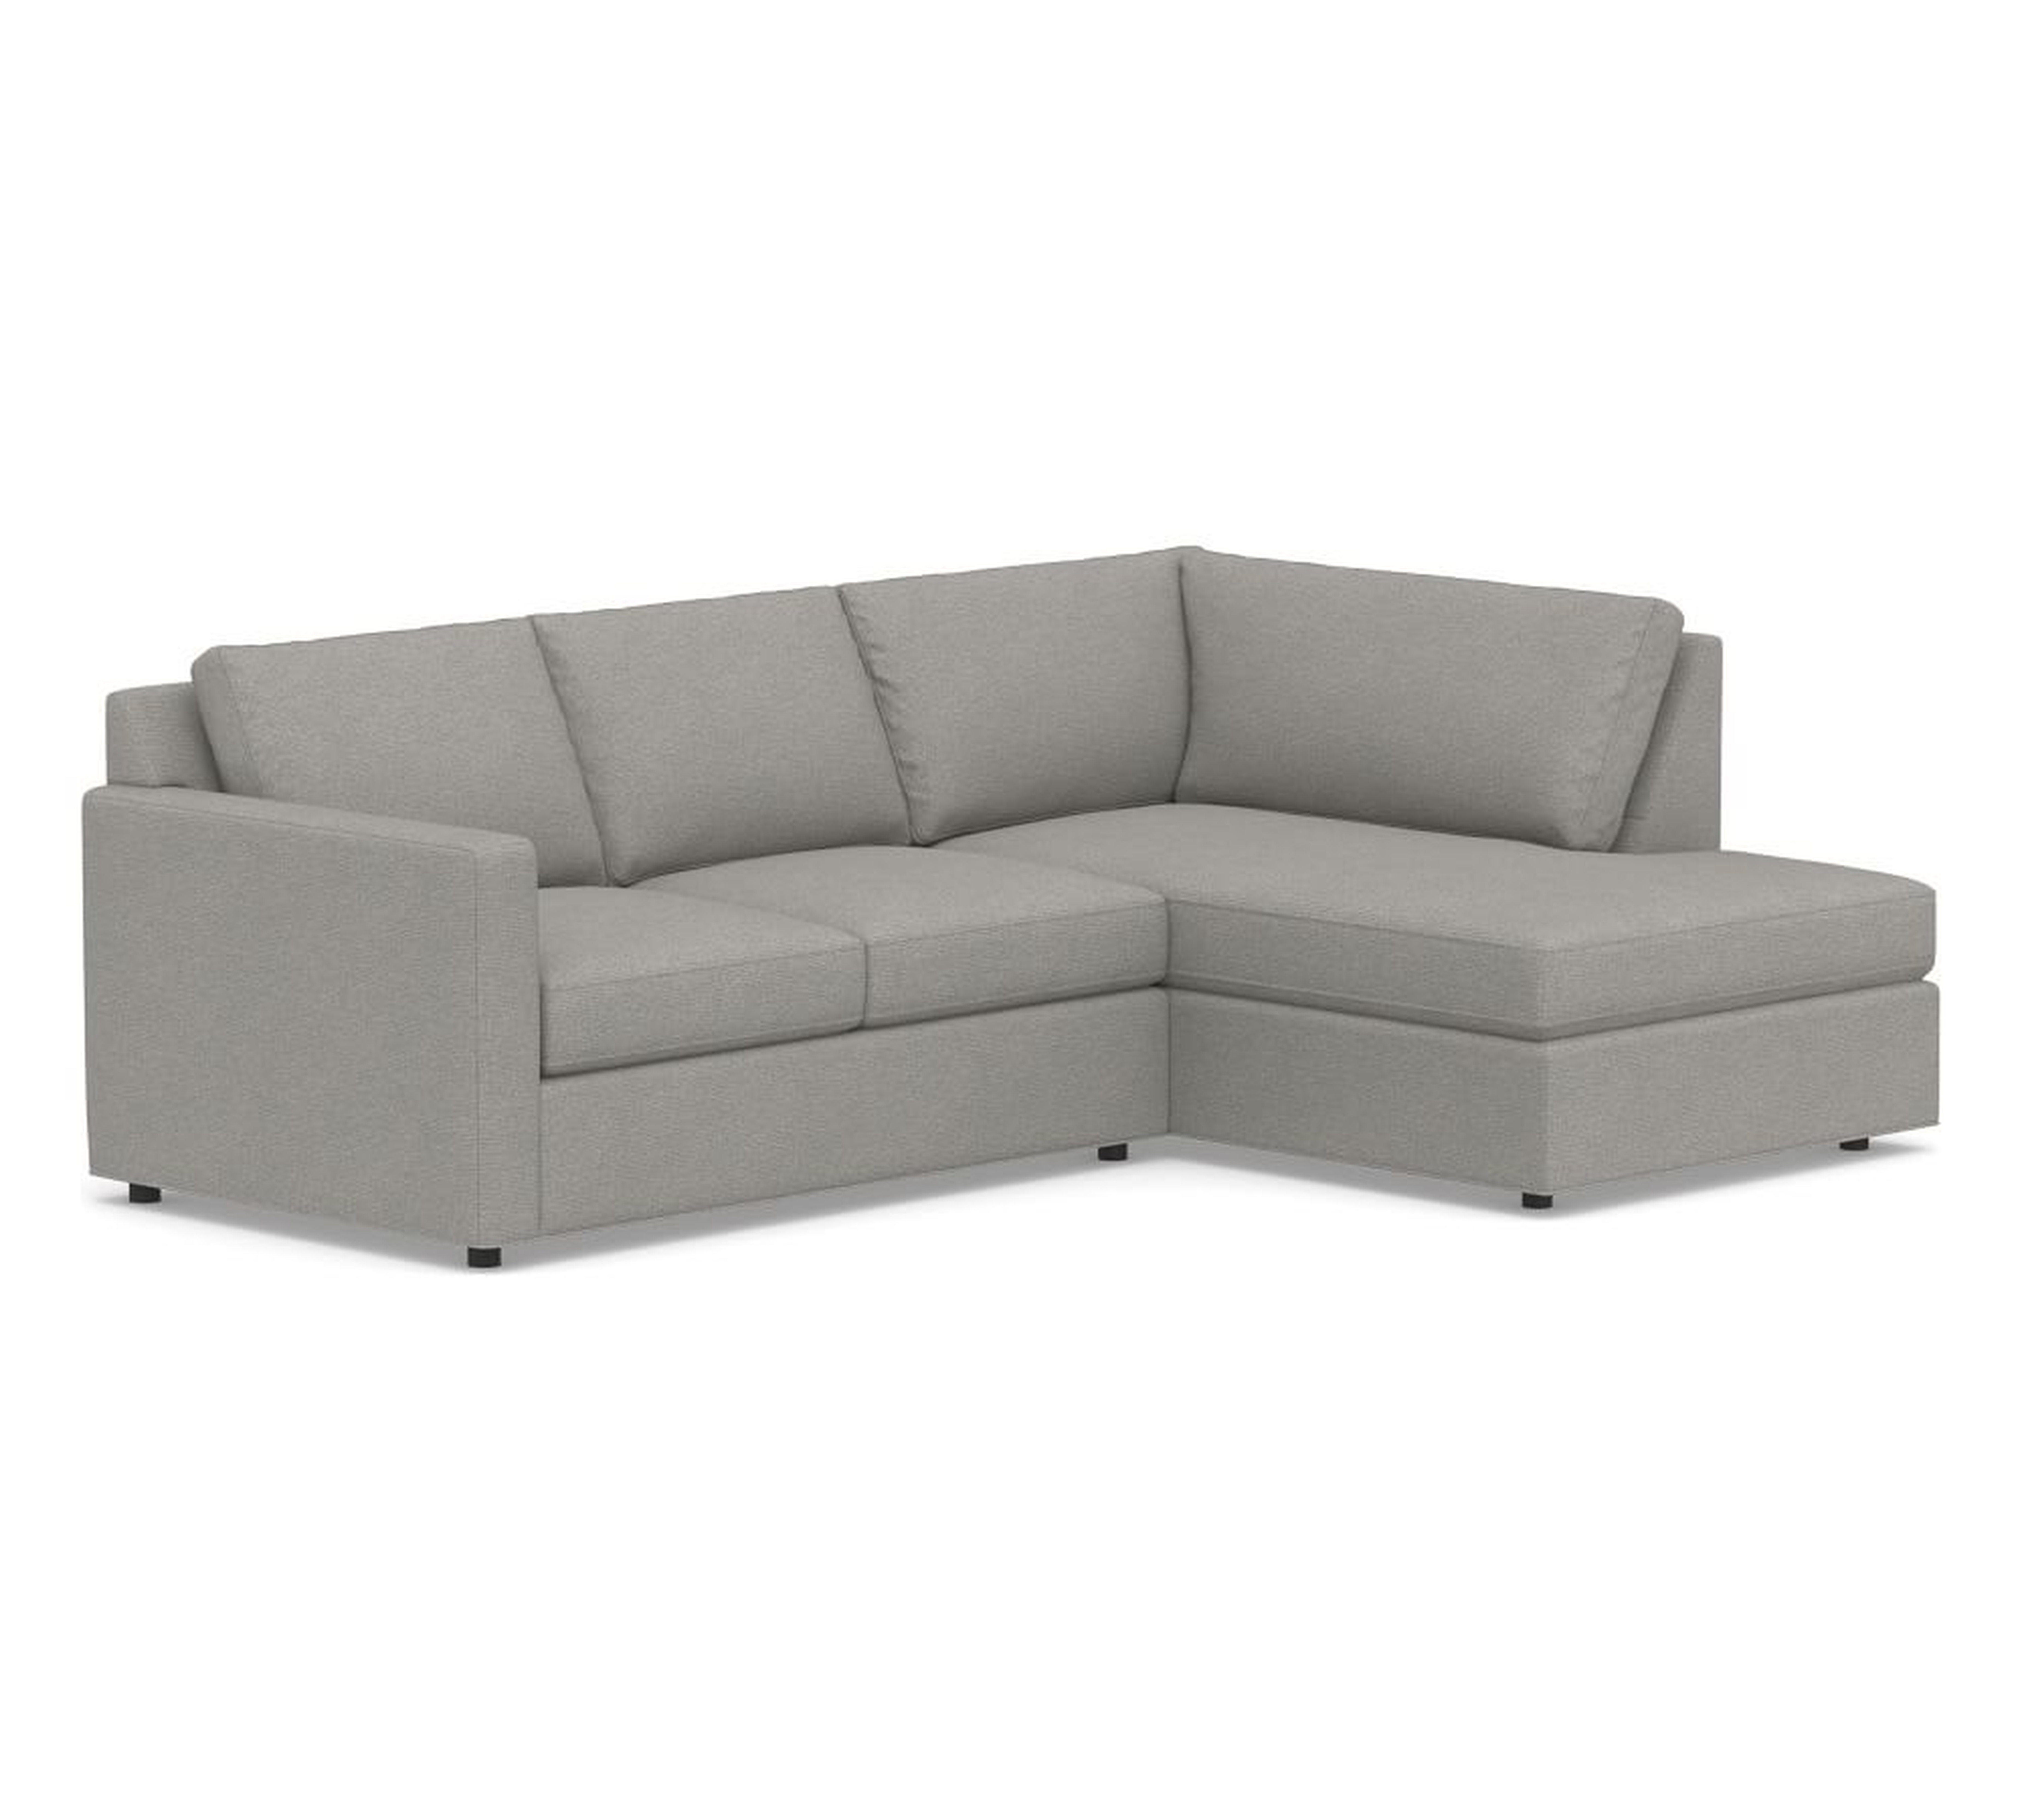 Sanford Square Arm Upholstered Right Sofa Return Bumper Sectional, Polyester Wrapped Cushions, Performance Heathered Basketweave Platinum - Pottery Barn